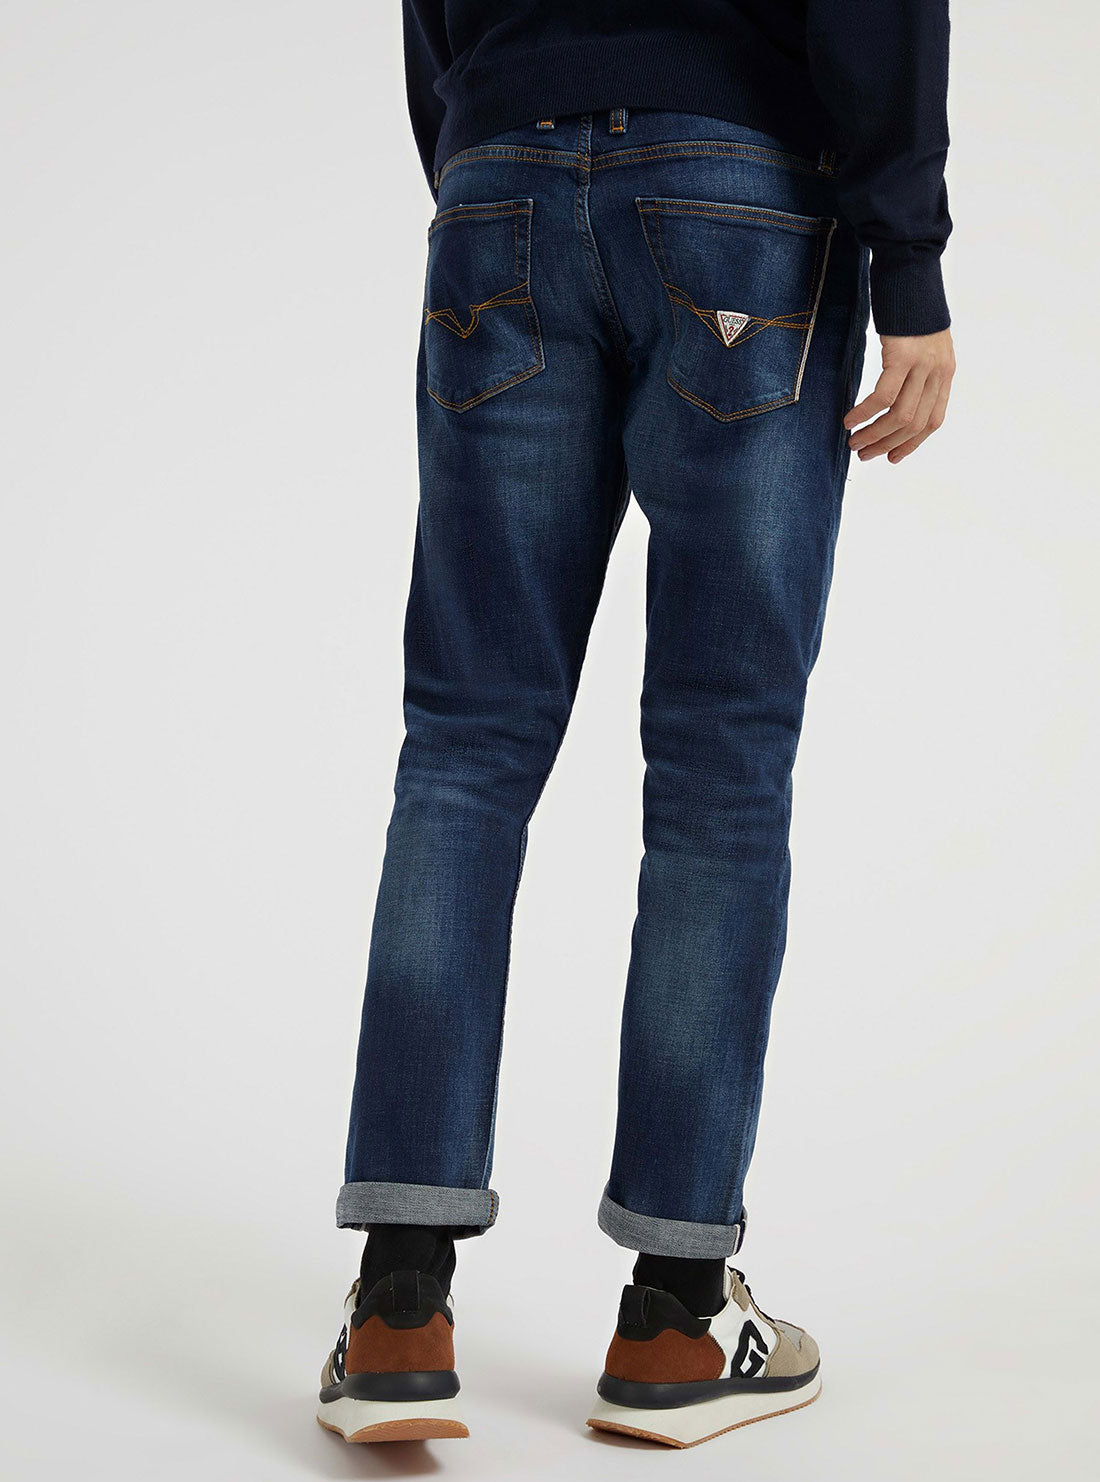 Eco Low Rise Slim Tapered Denim Jeans In Meadow Selvedge Wash